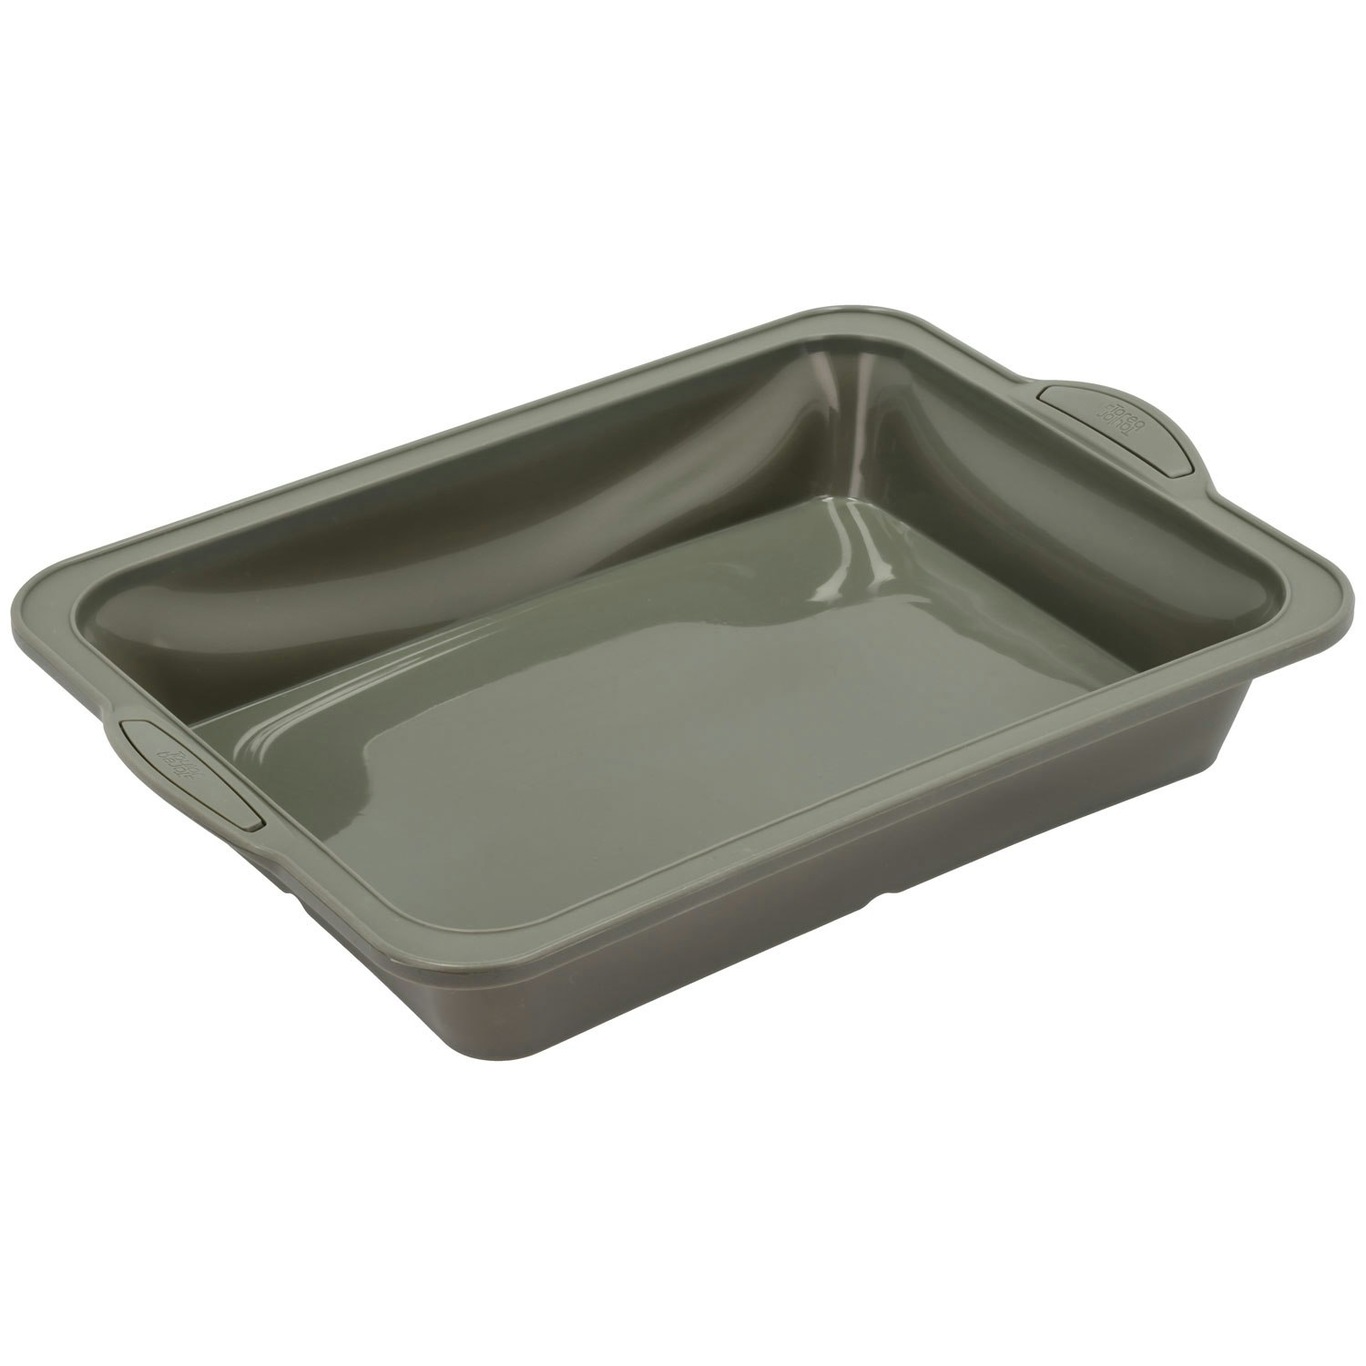 Pecan Oven Pan 21x28 cm, Forest Green